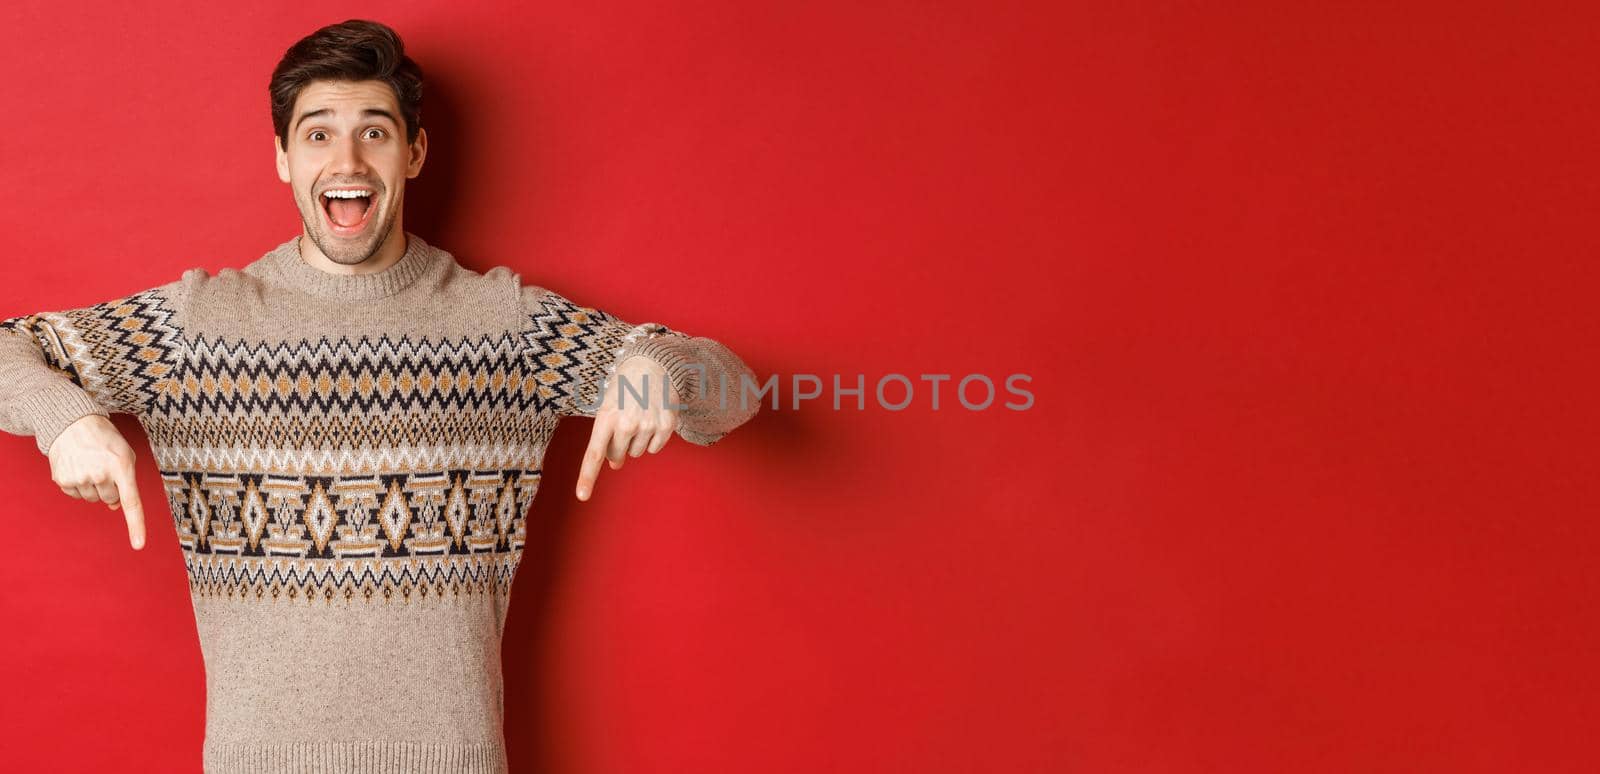 Concept of christmas celebration, winter holidays and lifestyle. Excited caucasian male model in xmas sweater, pointing fingers down and making announcement, showing advertisement, red background.